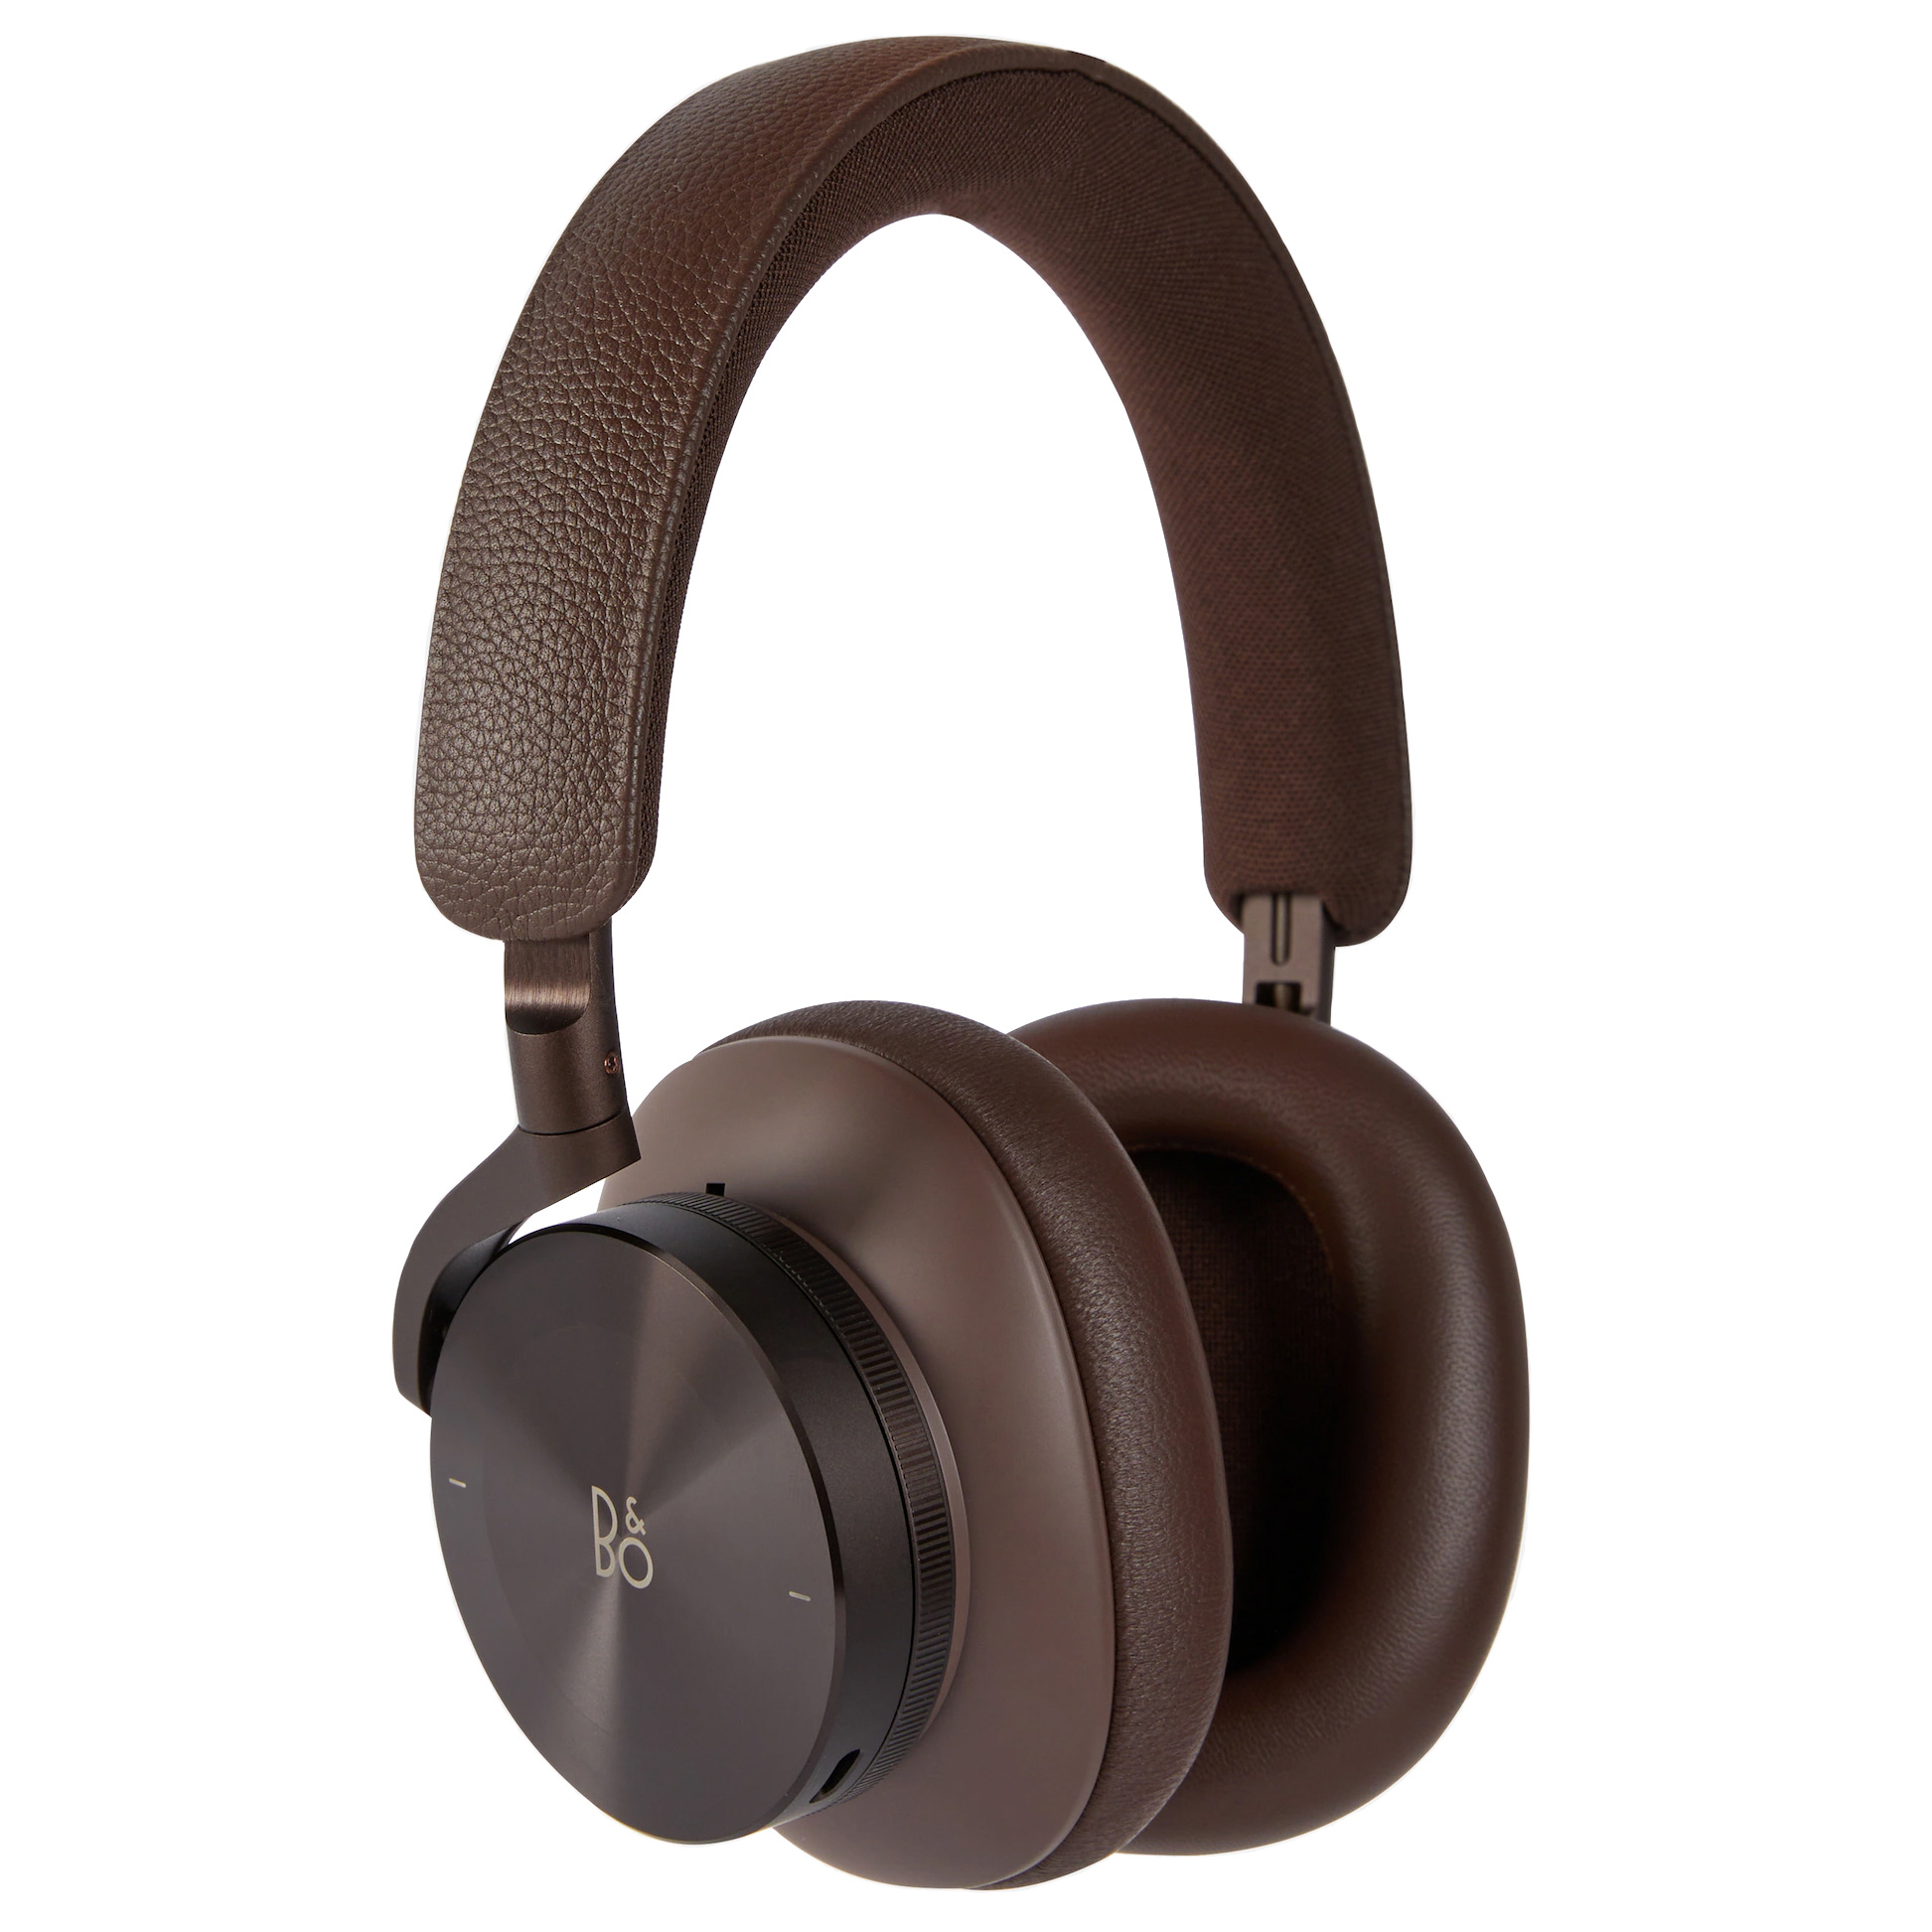 Bang olufsen beoplay h95. BEOPLAY h95. Наушники Bang Olufsen. Наушники 95.